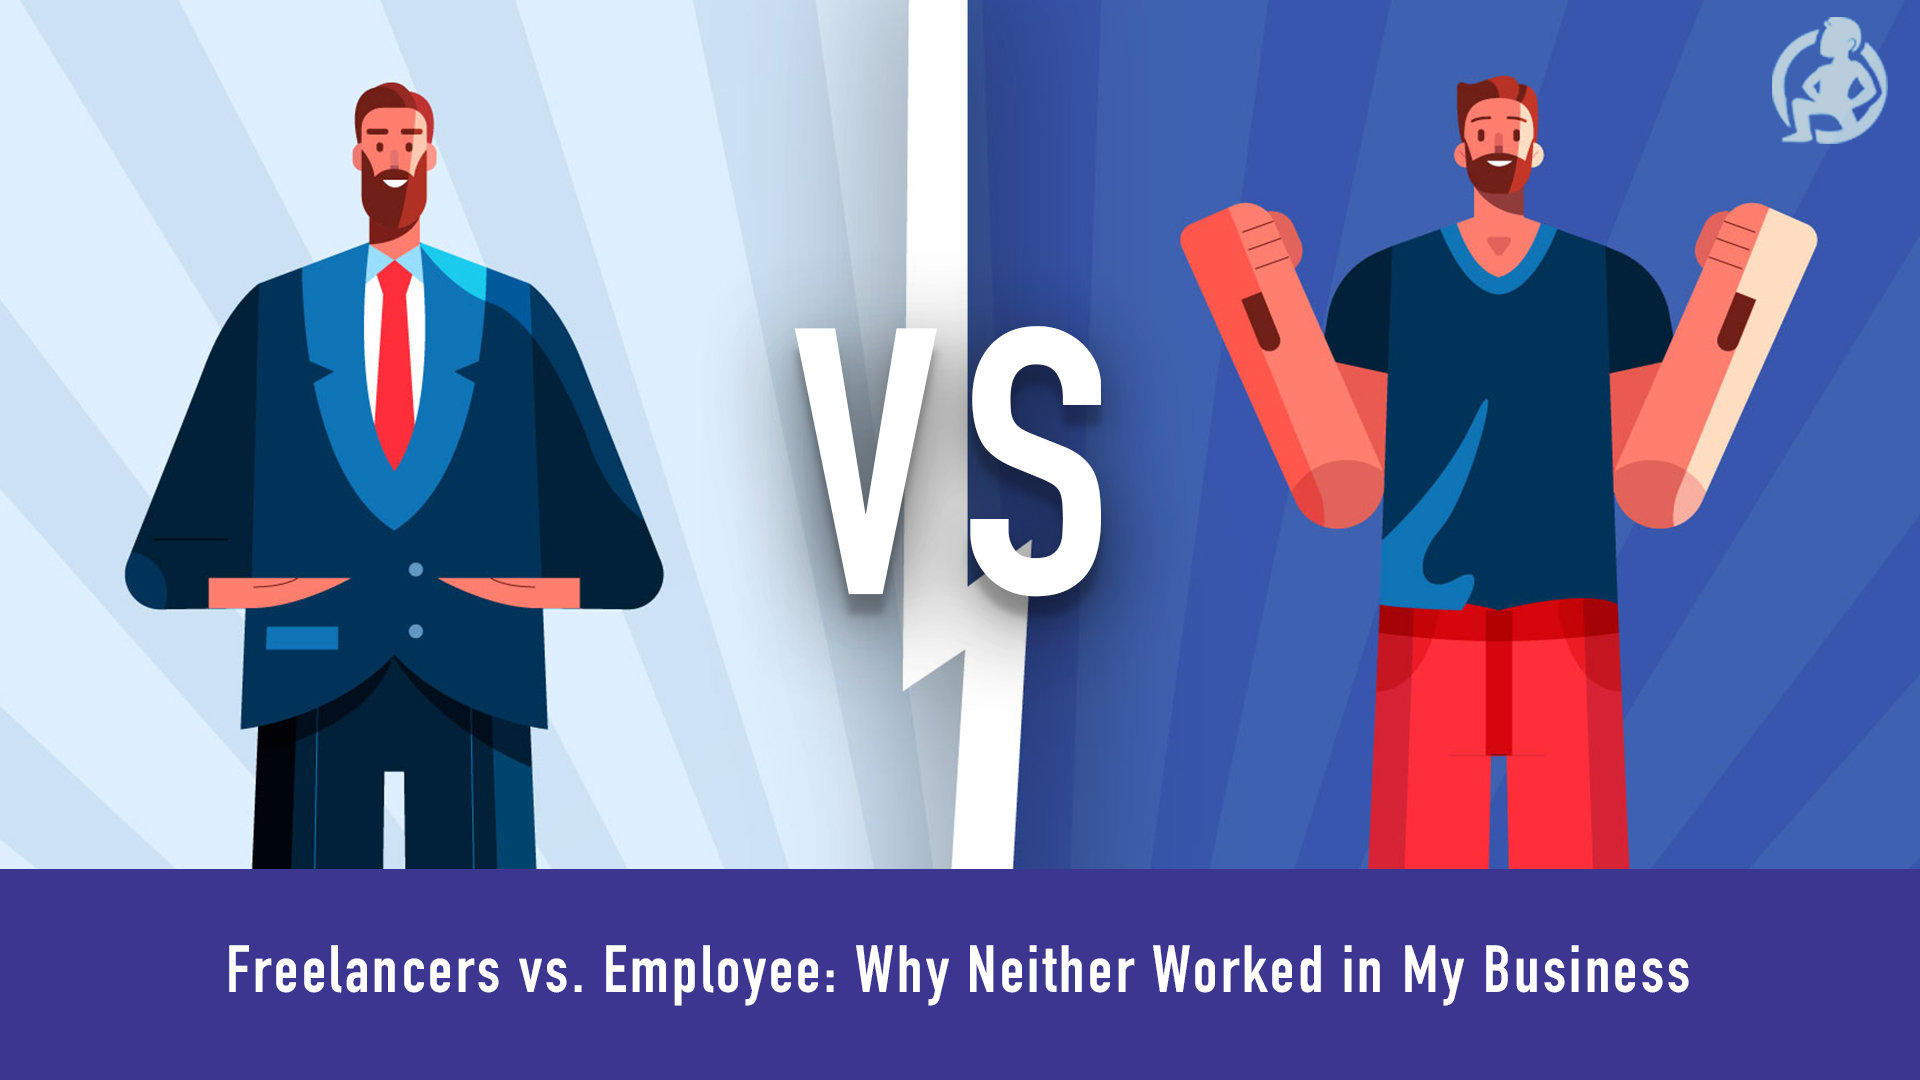 731 Freelancers vs. Employee Why Neither Worked in My Business